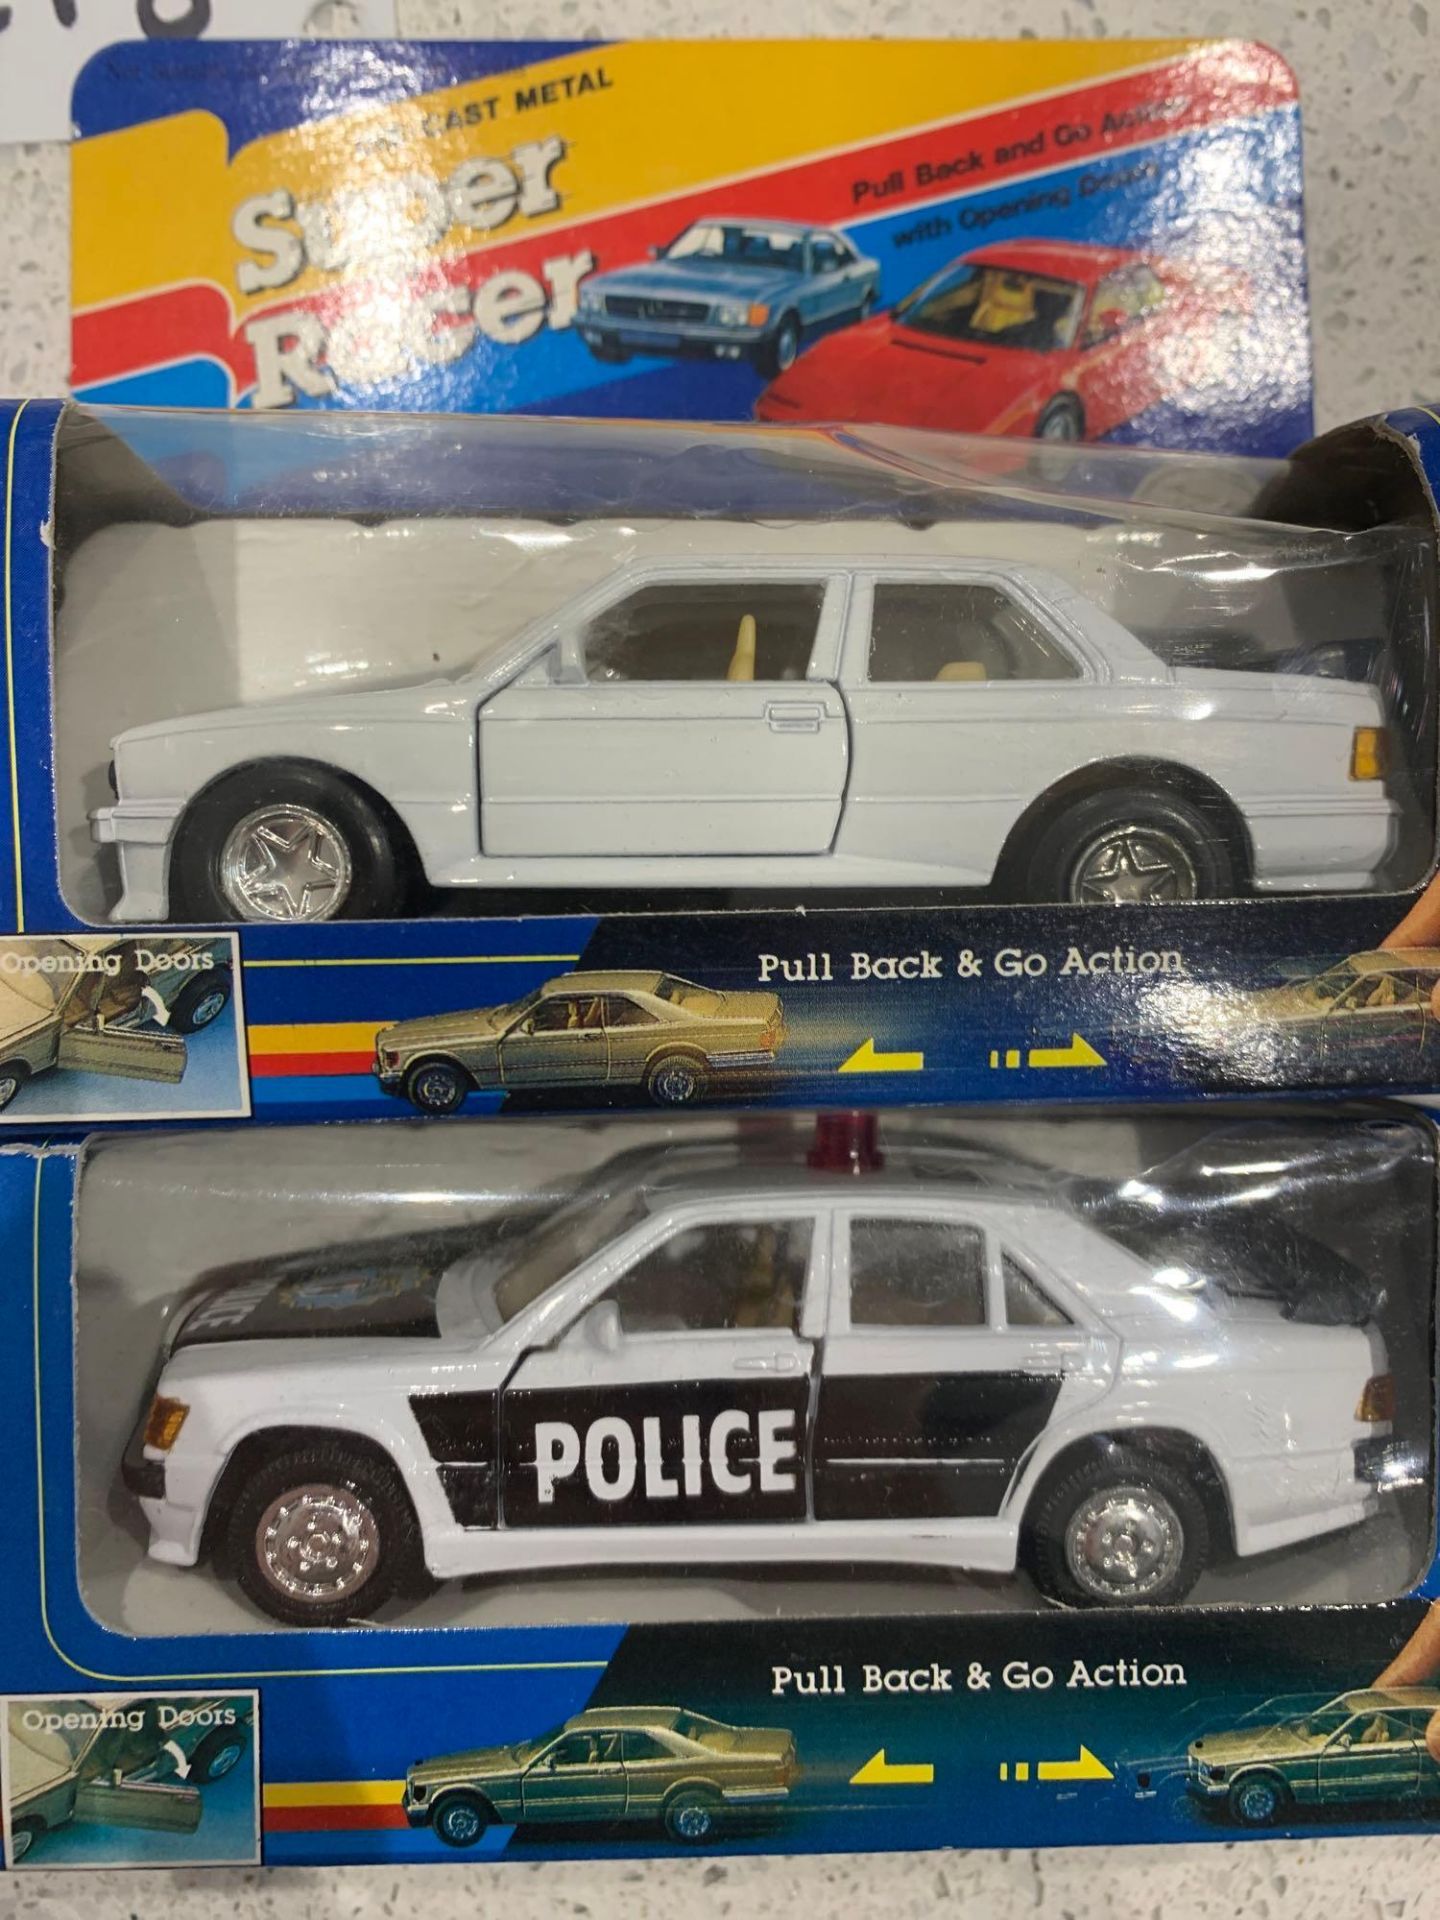 2 X Super Racer Mercedes Benz Models I With Police Markings - Image 2 of 4